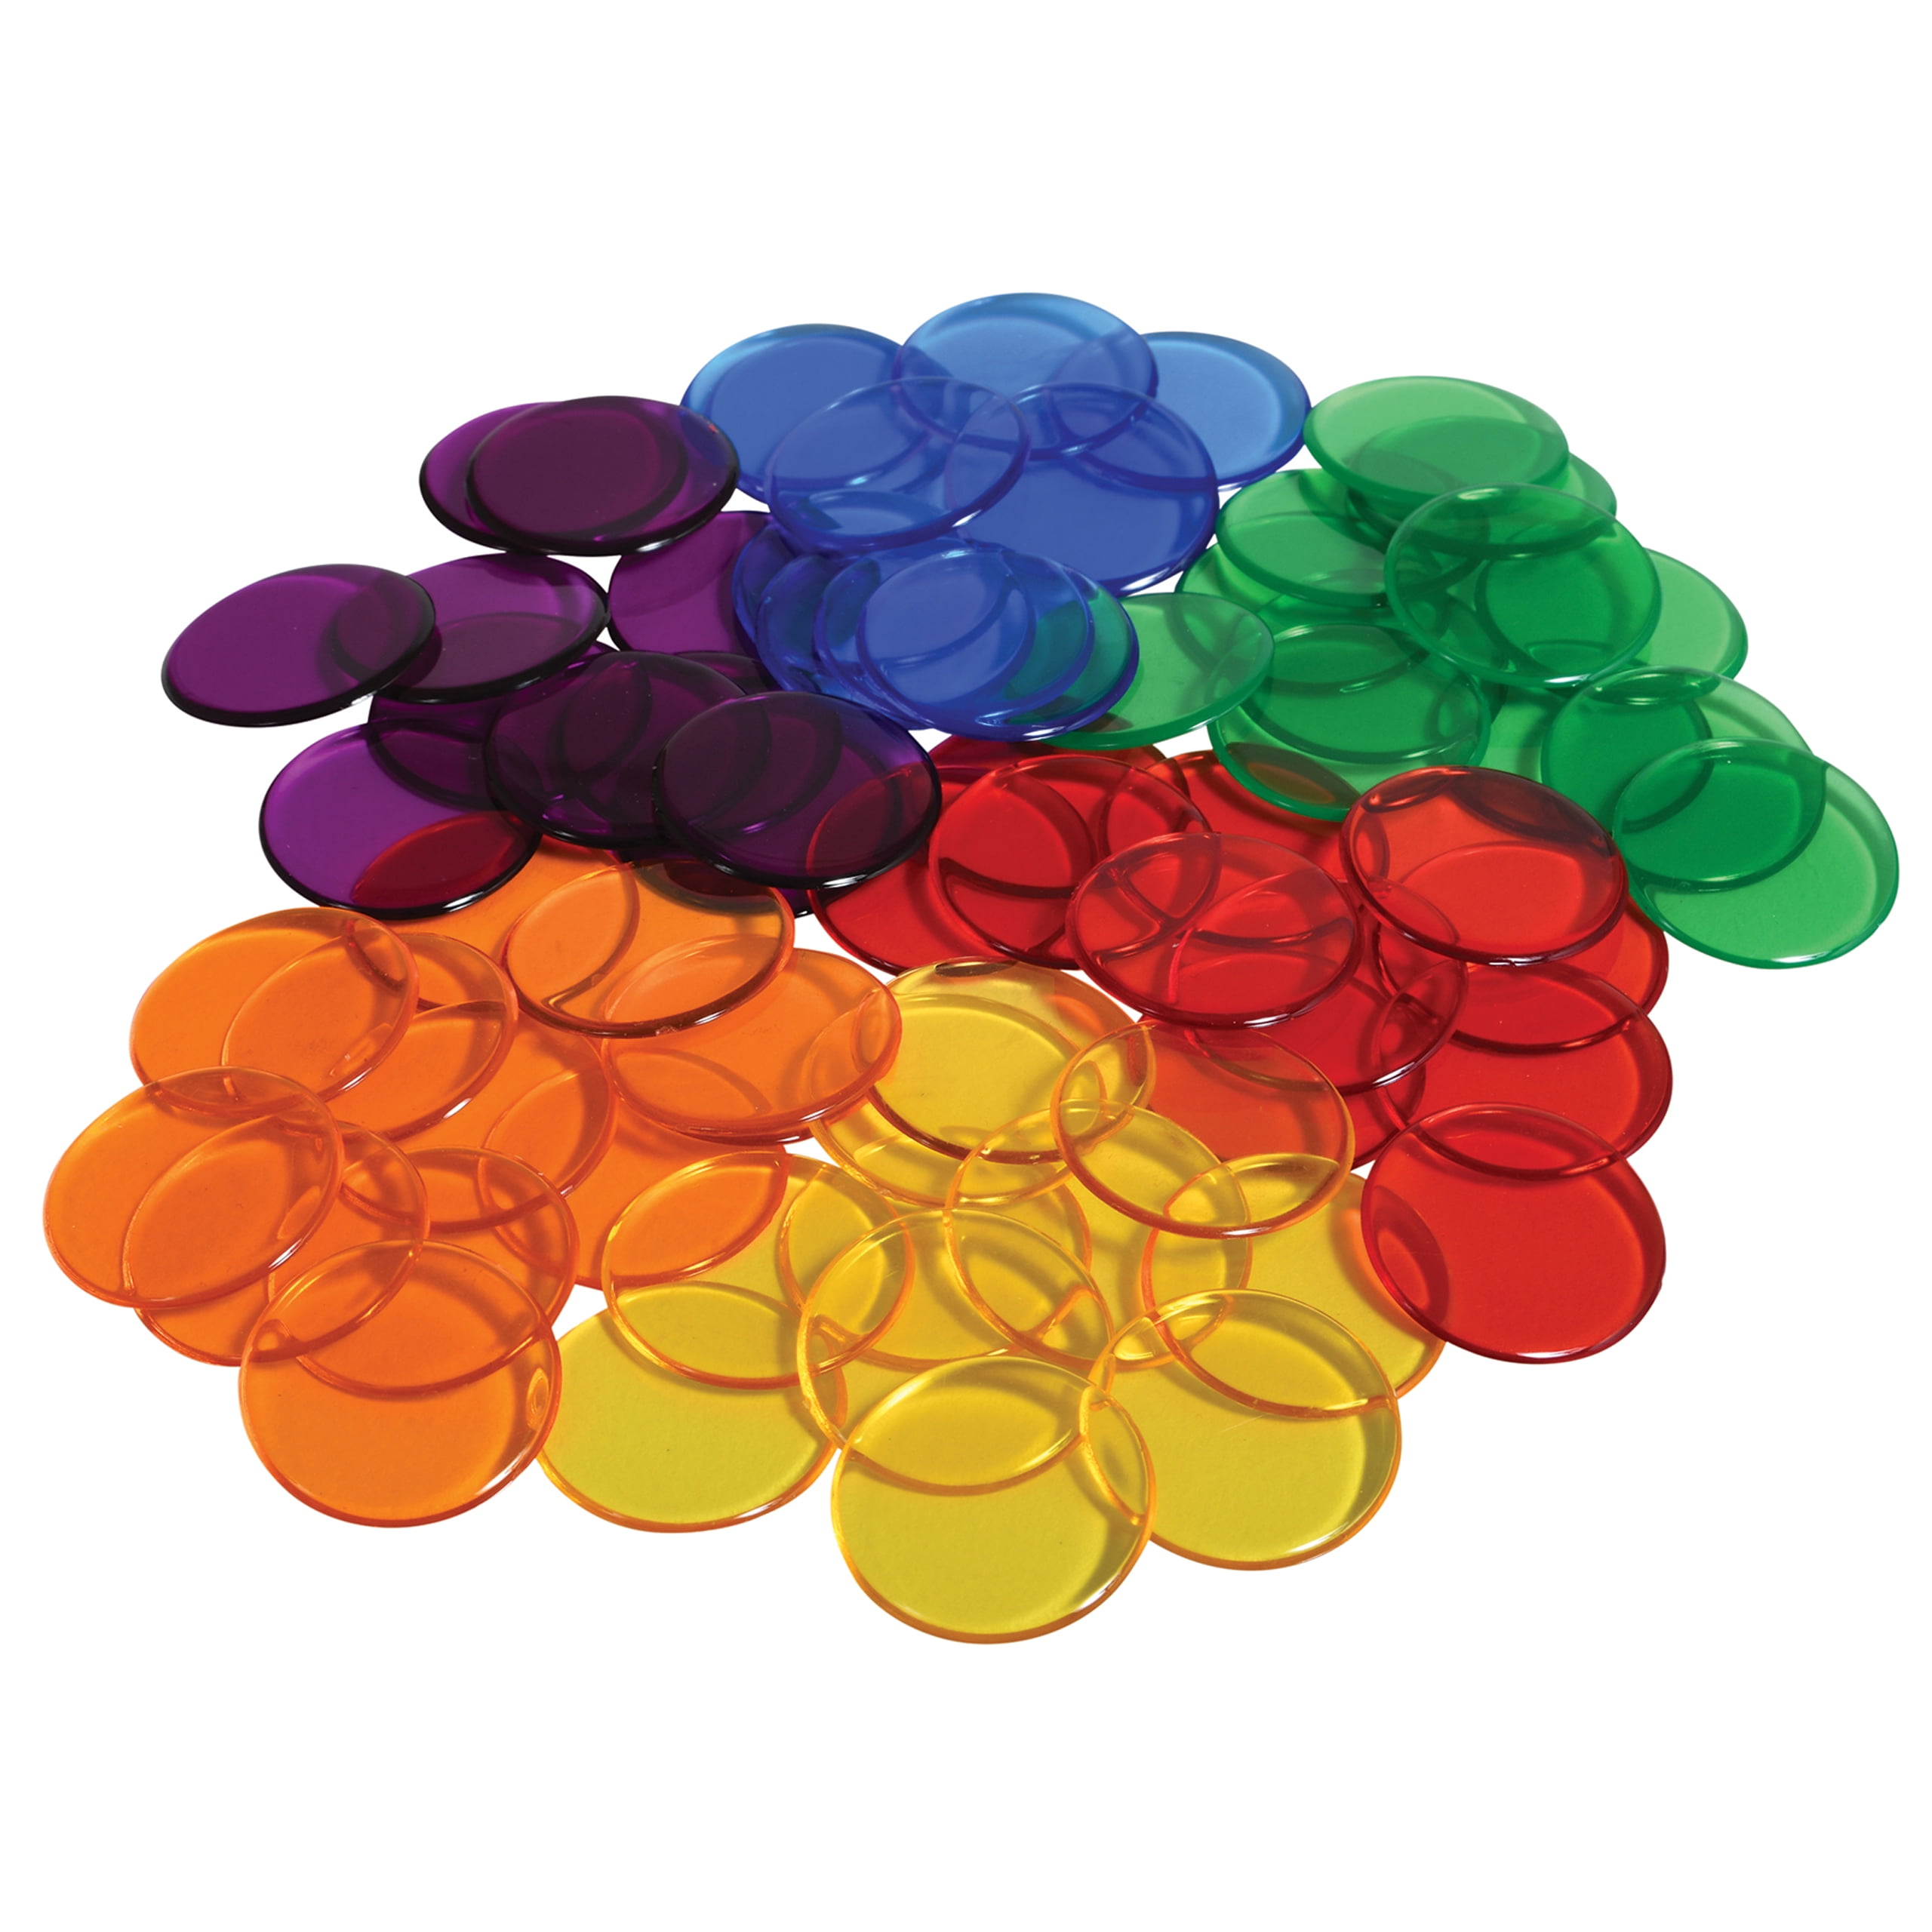 Fun Educational Teaching Aids Colored Counting Math Chips 600 Stacking Pieces 